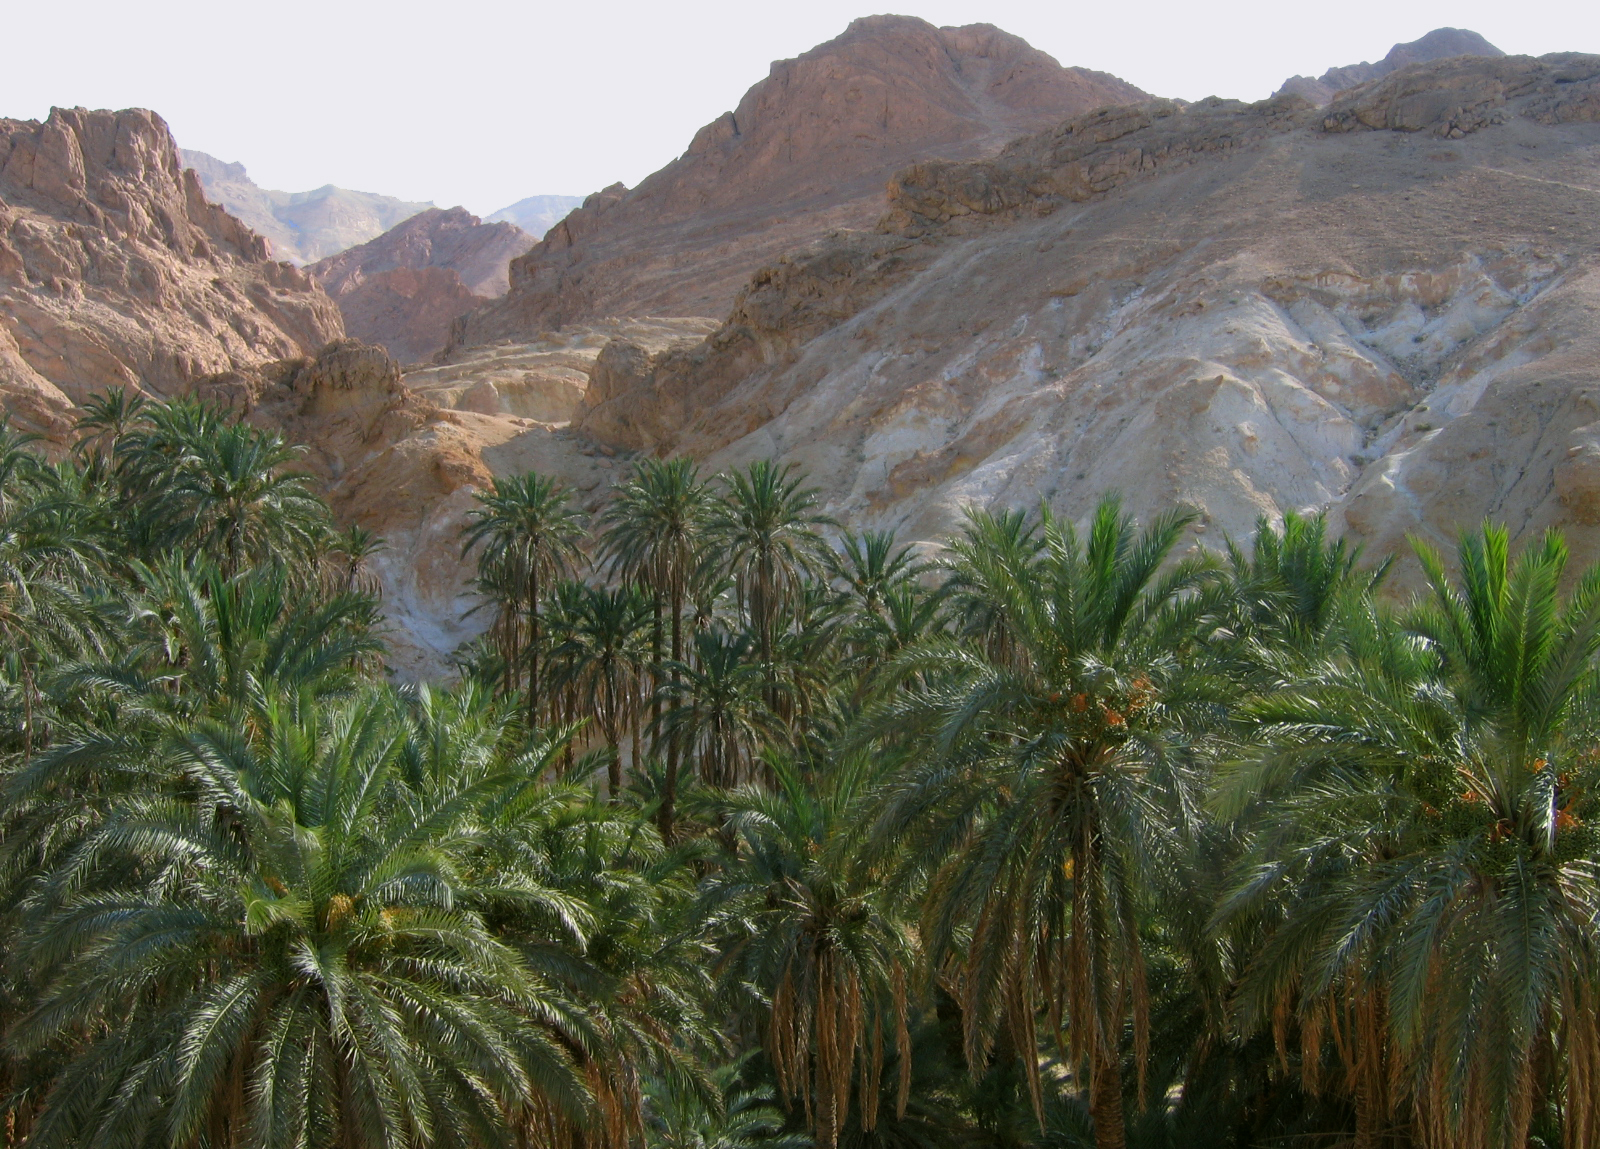 Chebicka_gorge_in_the_Atlas_Mountains.jpg